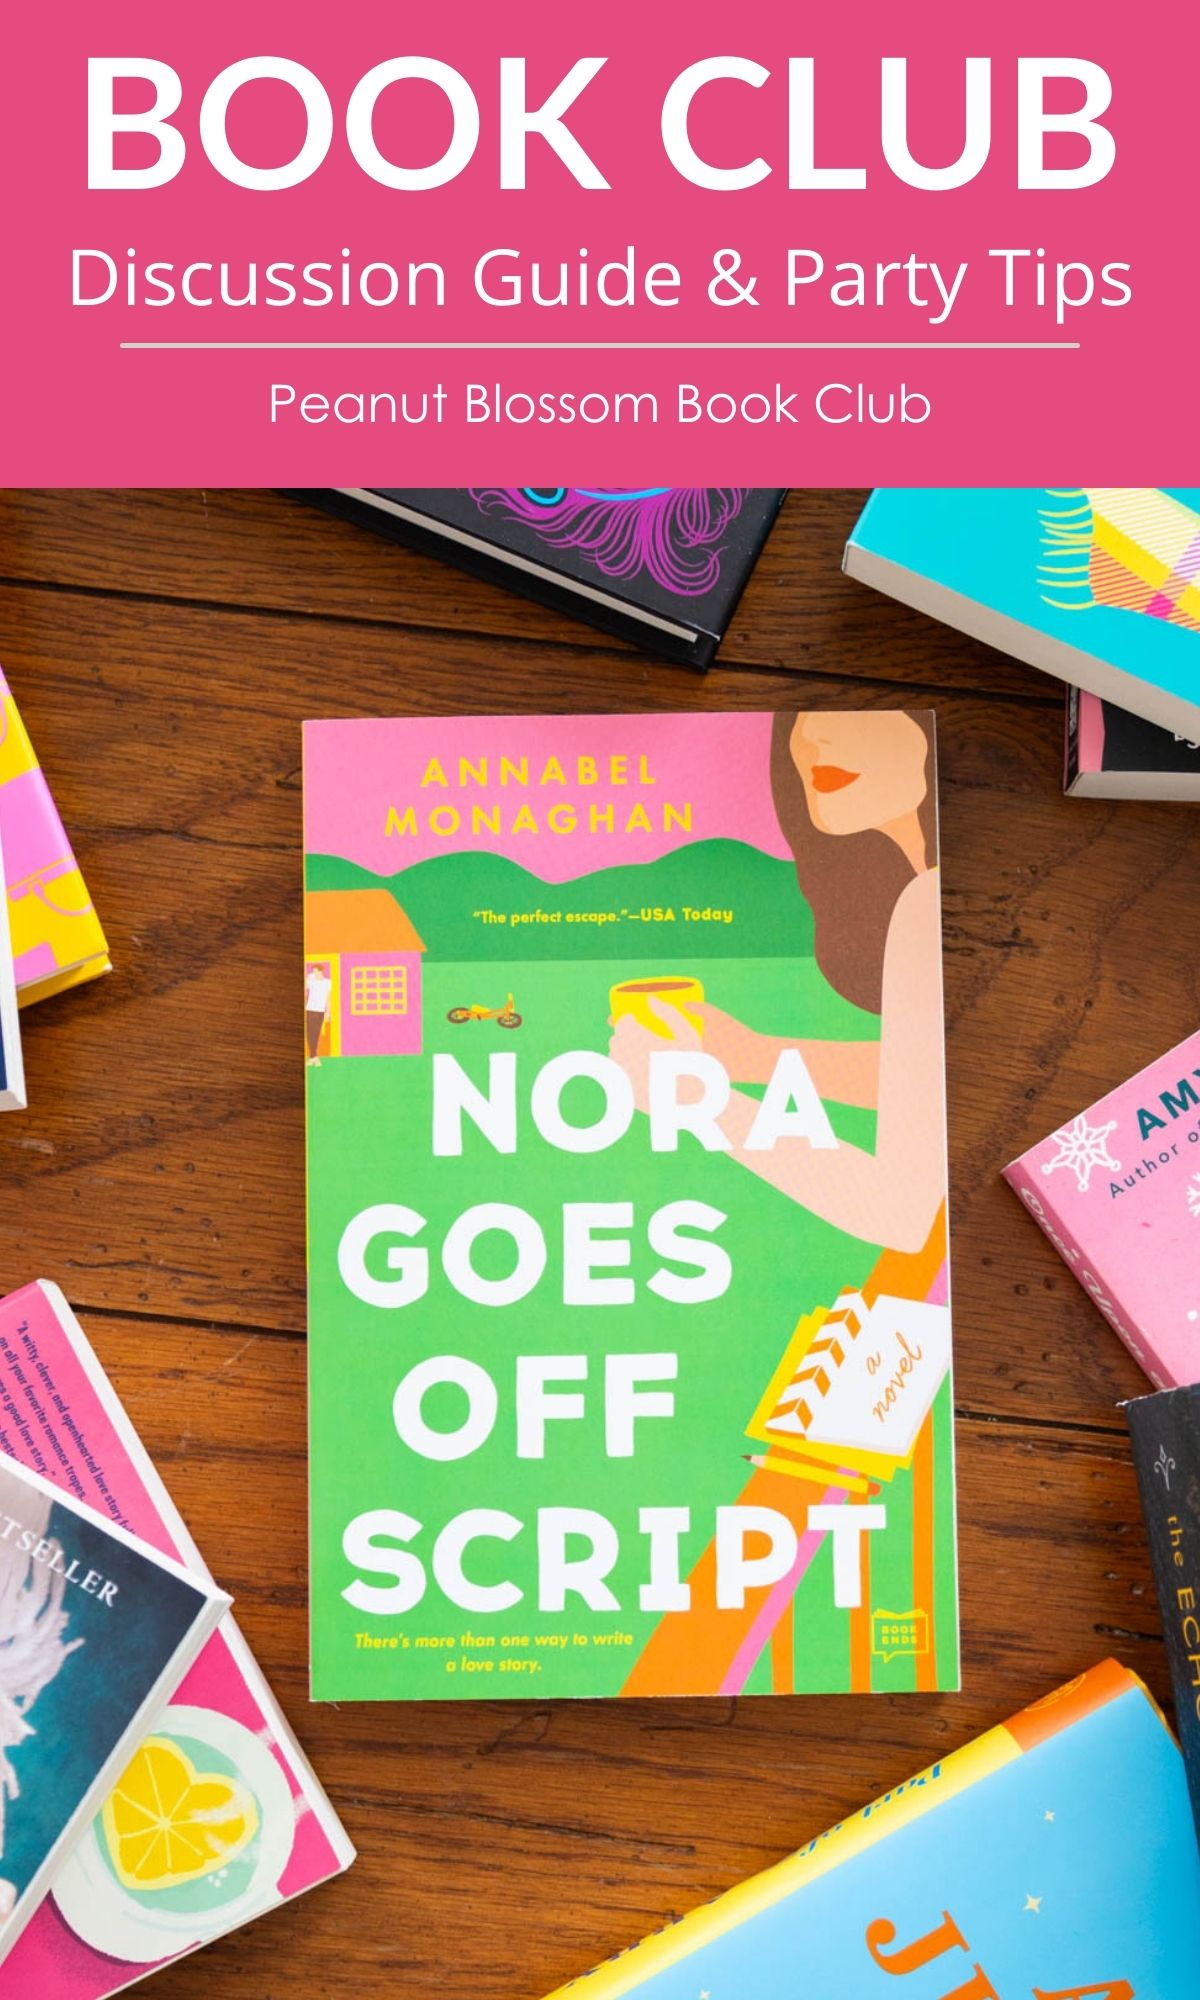 A copy of the book Nora Goes Off Script is on the table.